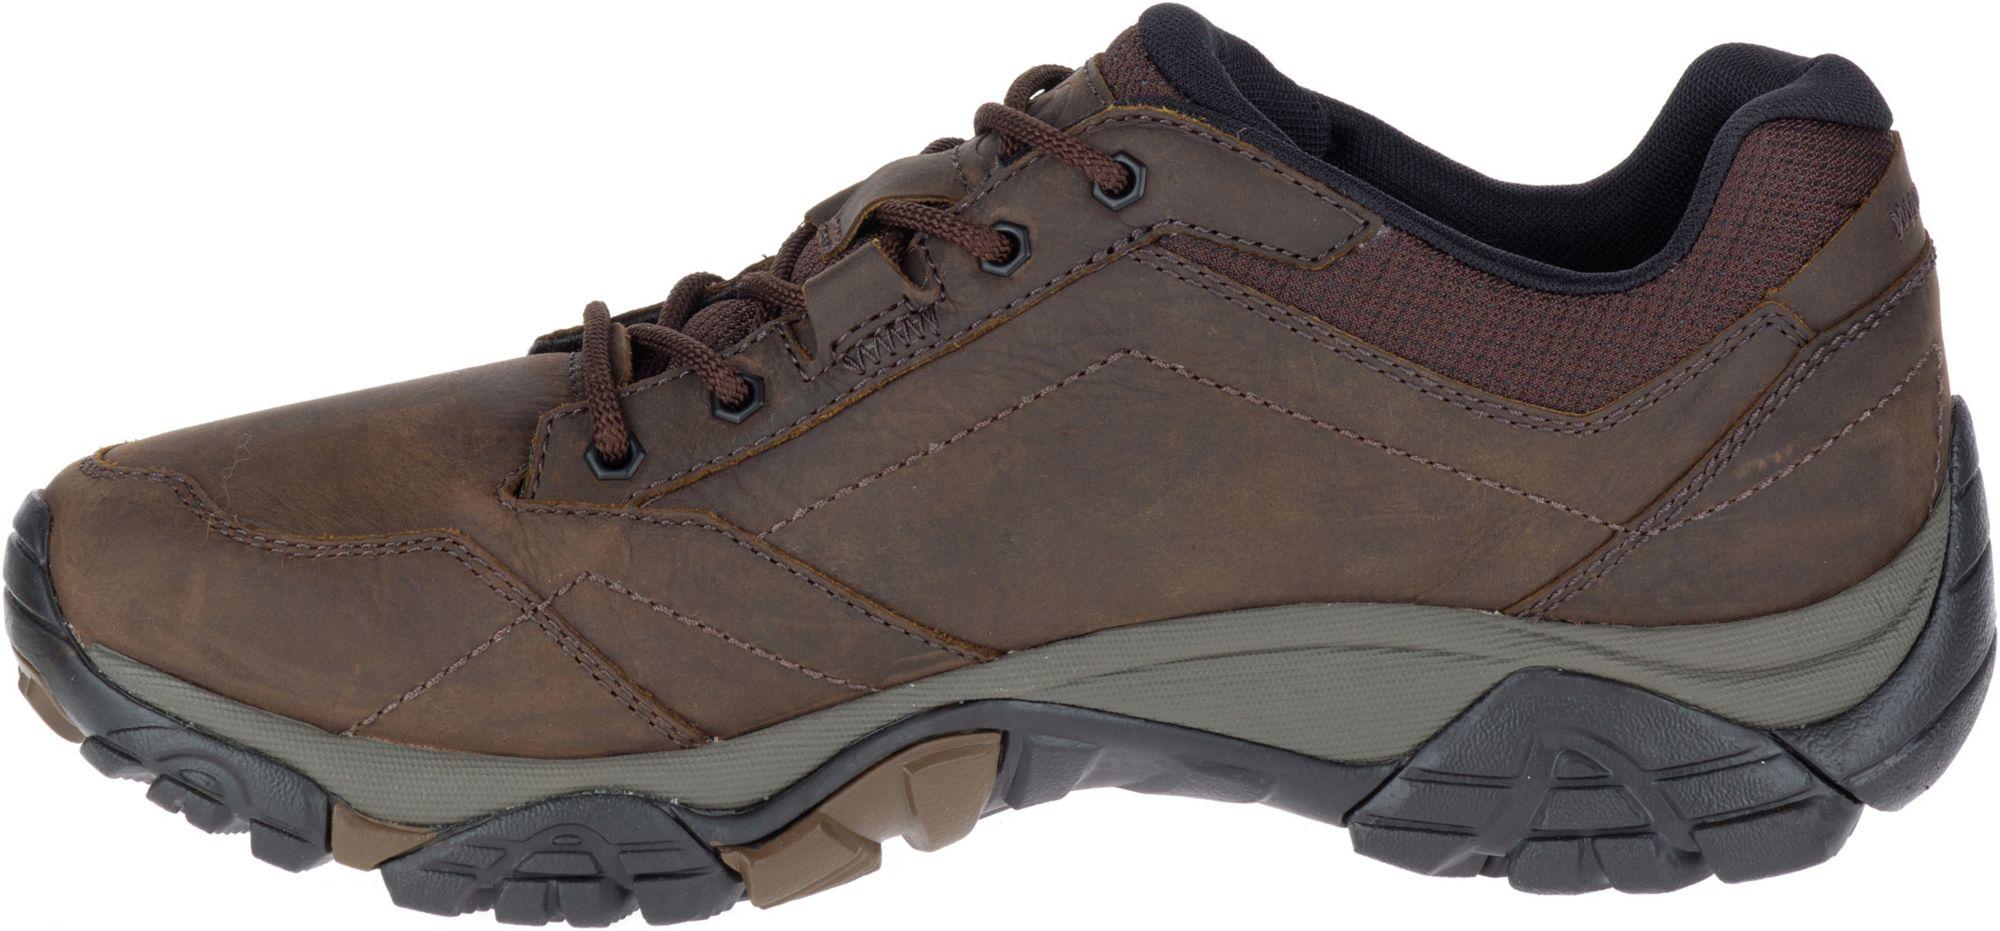 Merrell Moab Adventure Lace Hiking Shoes in Brown for Men - Lyst